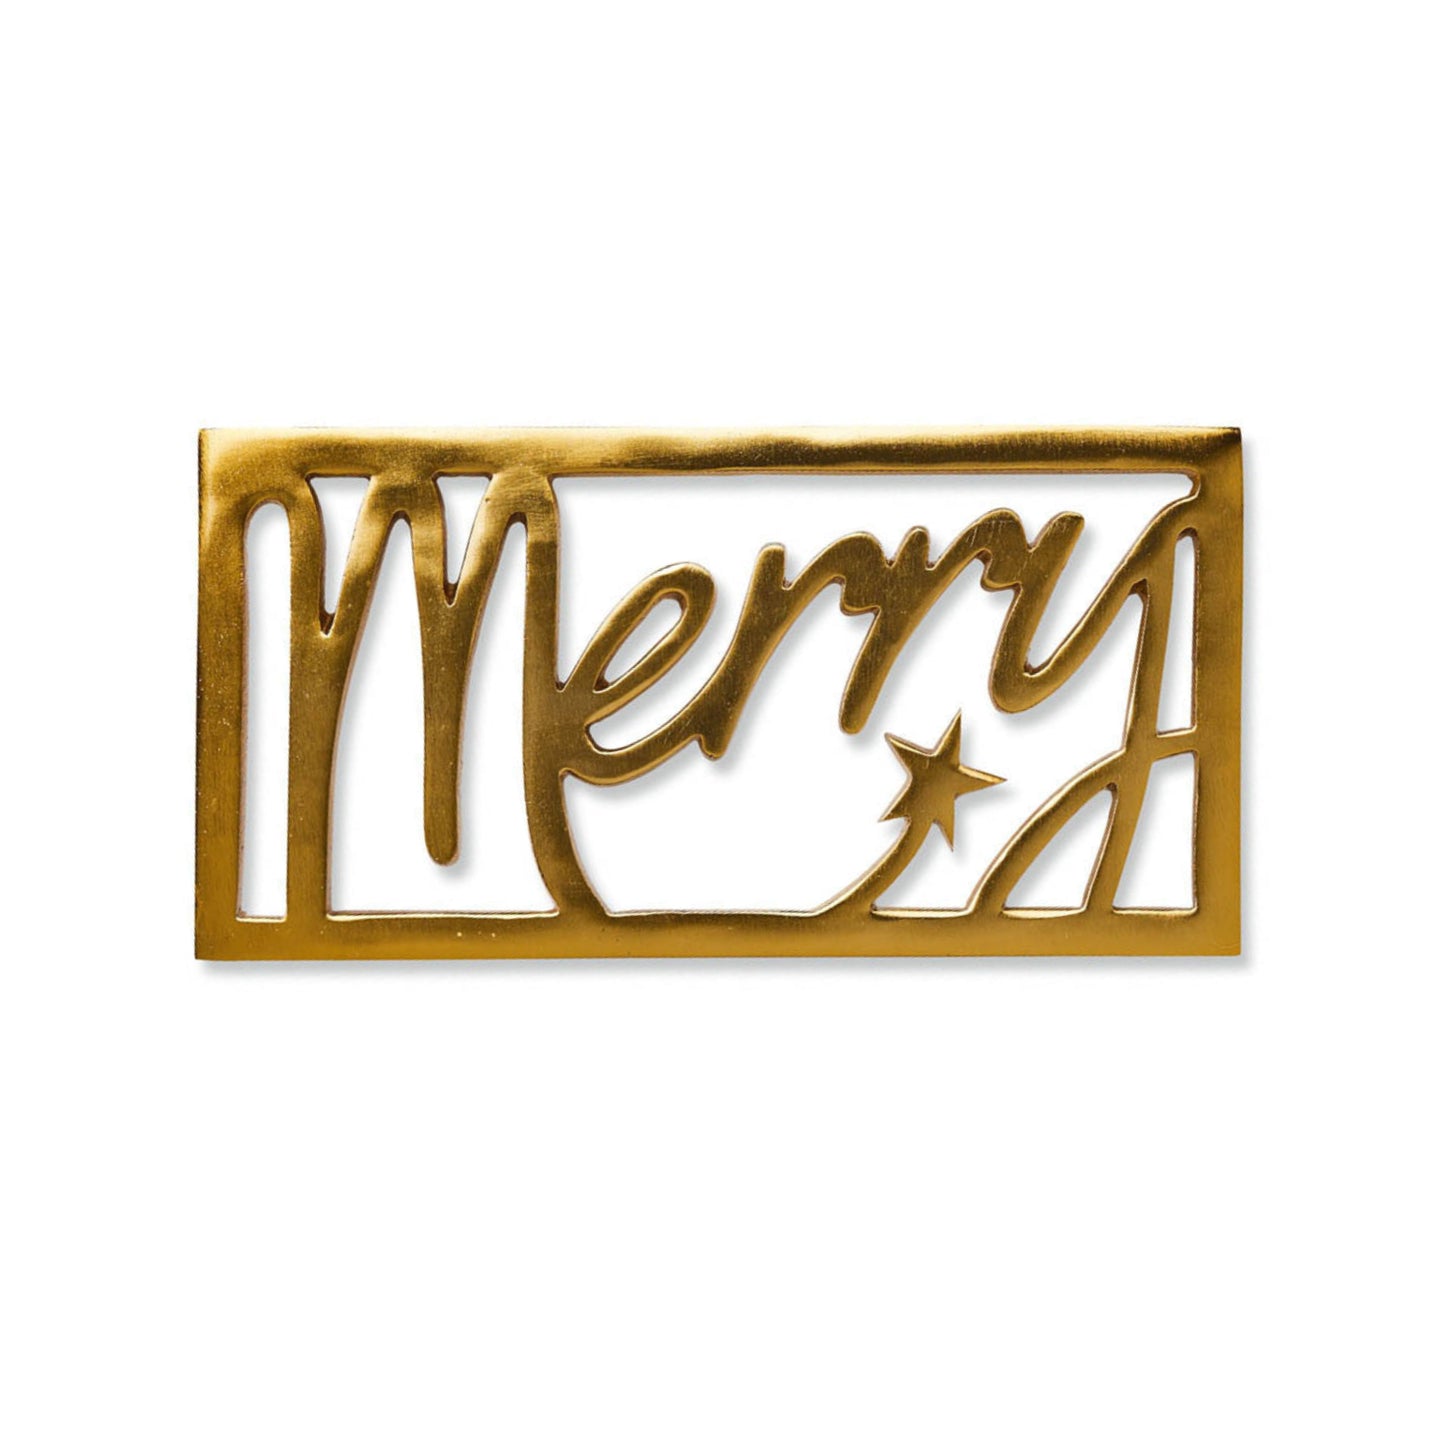 Merry & Bright Brass Table Trivets Festive Holiday Decor